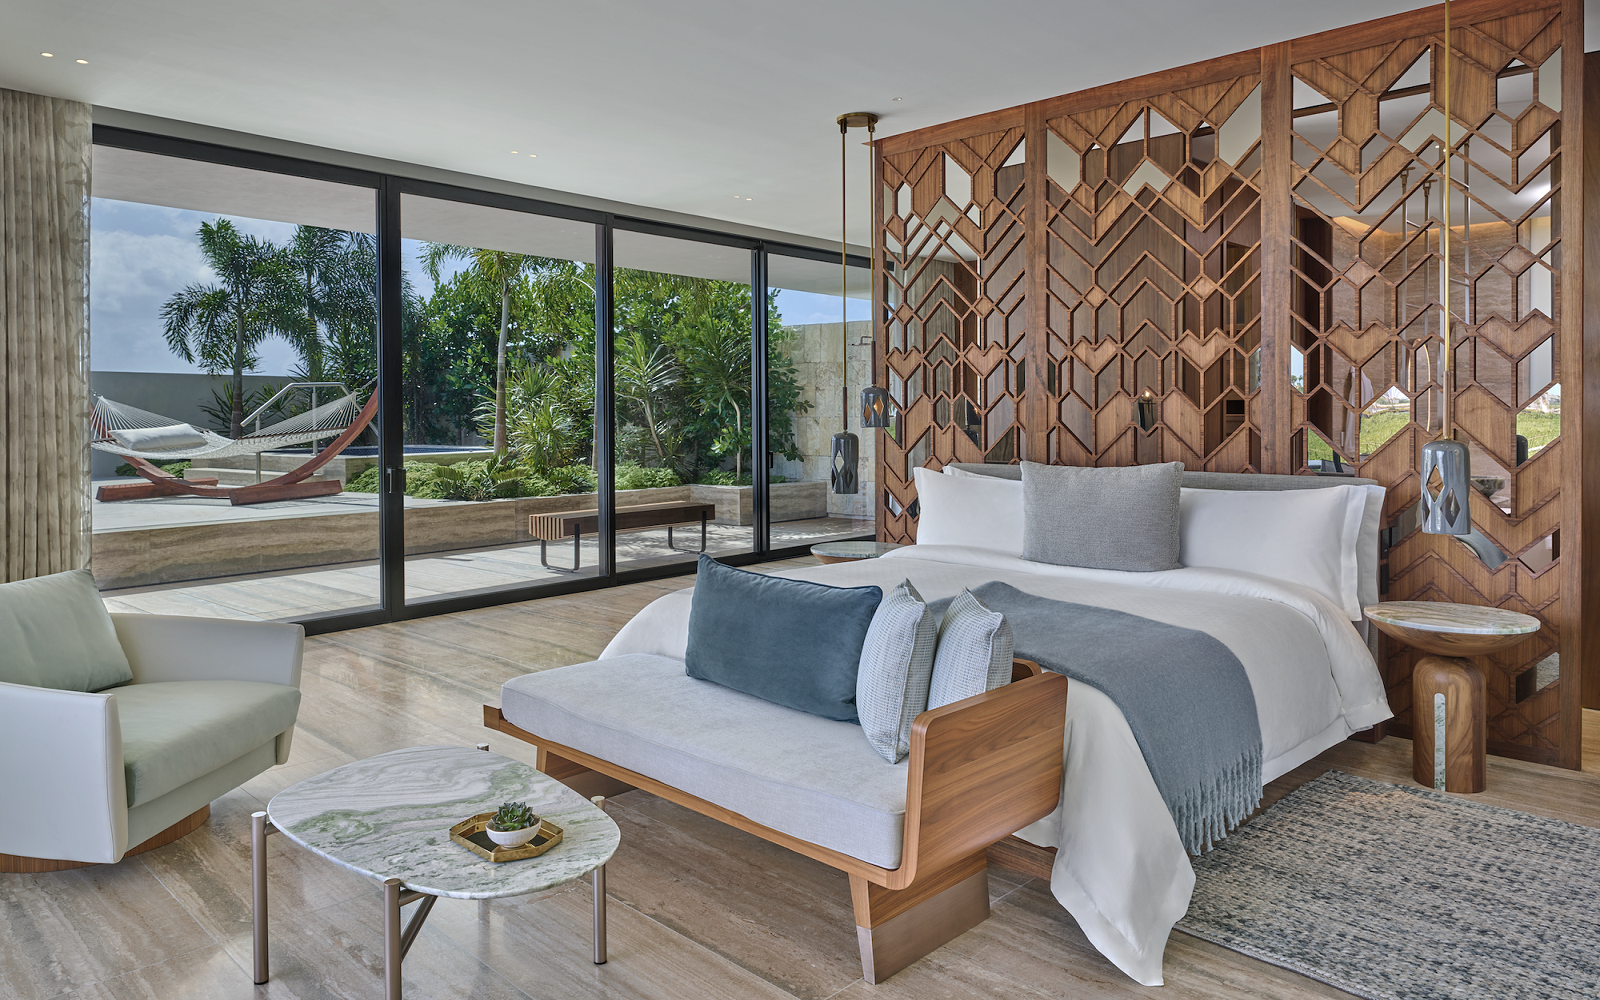 guestroom with wooden headboard divider detail and view to terrace with hammock at St Regis Kanai Resort by Chapi Chapo